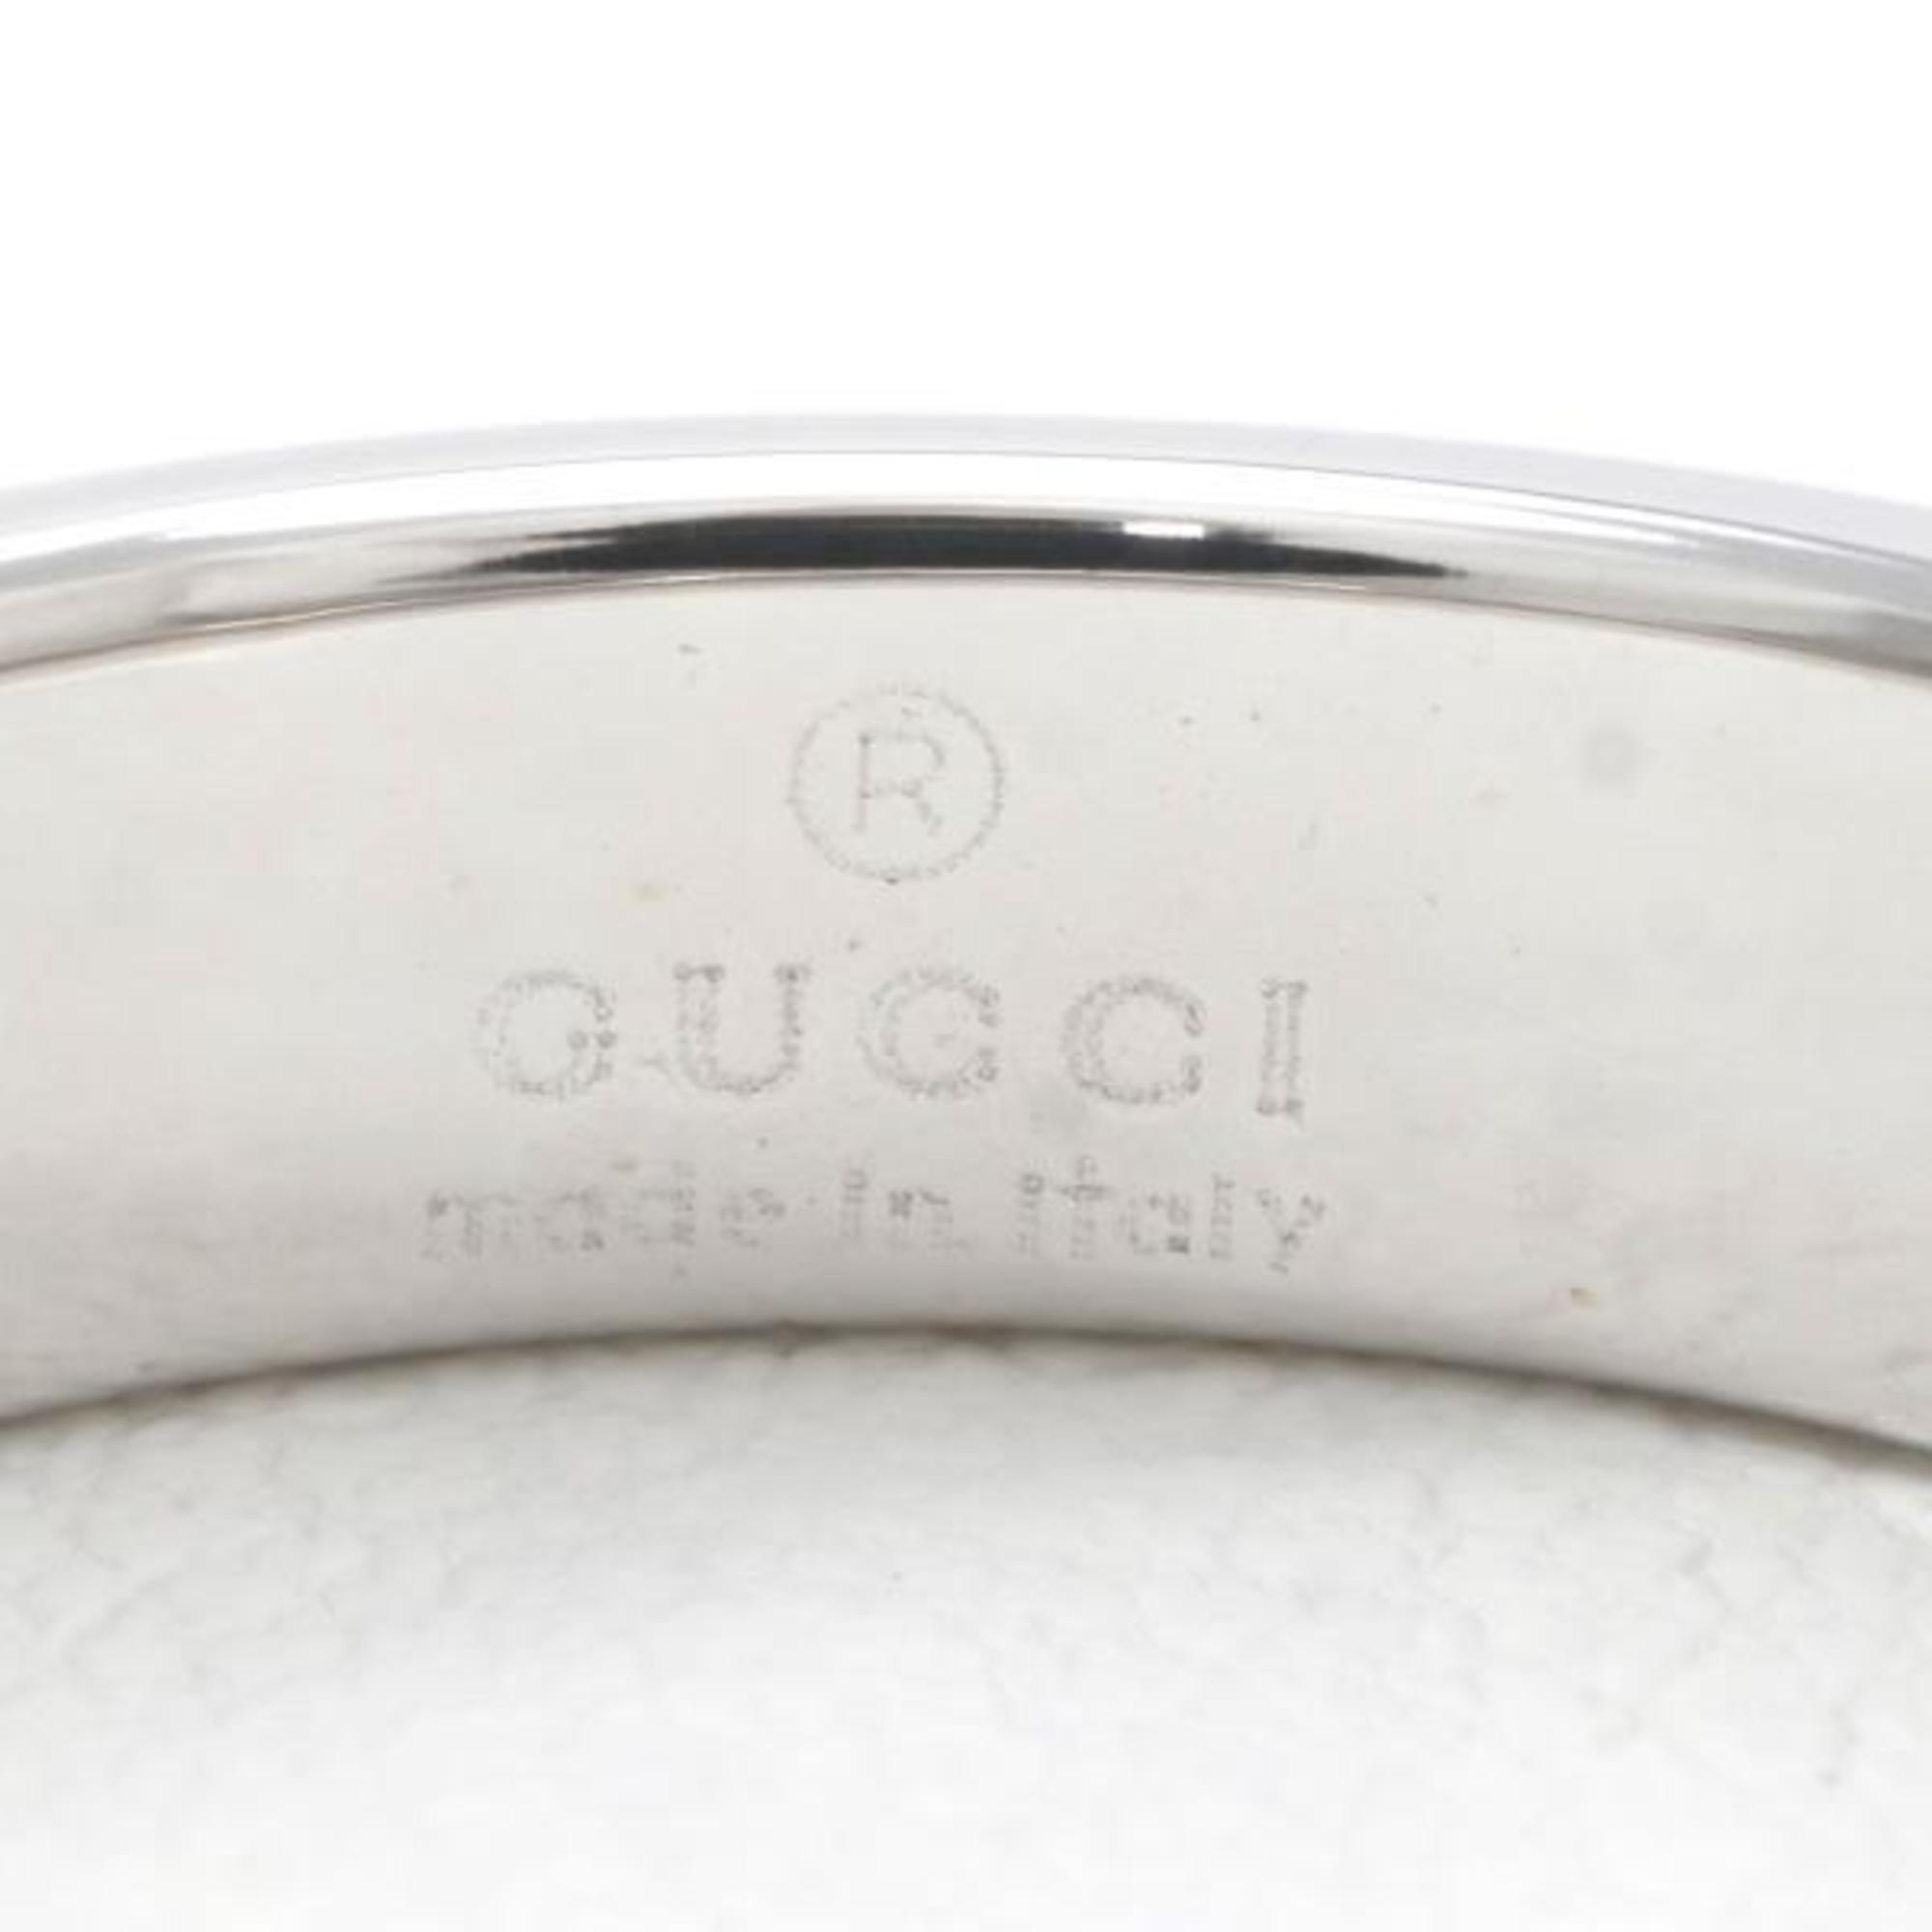 Gucci Icon K18WG Ring Size 11.5 Total Weight Approx. 3.4g Jewelry